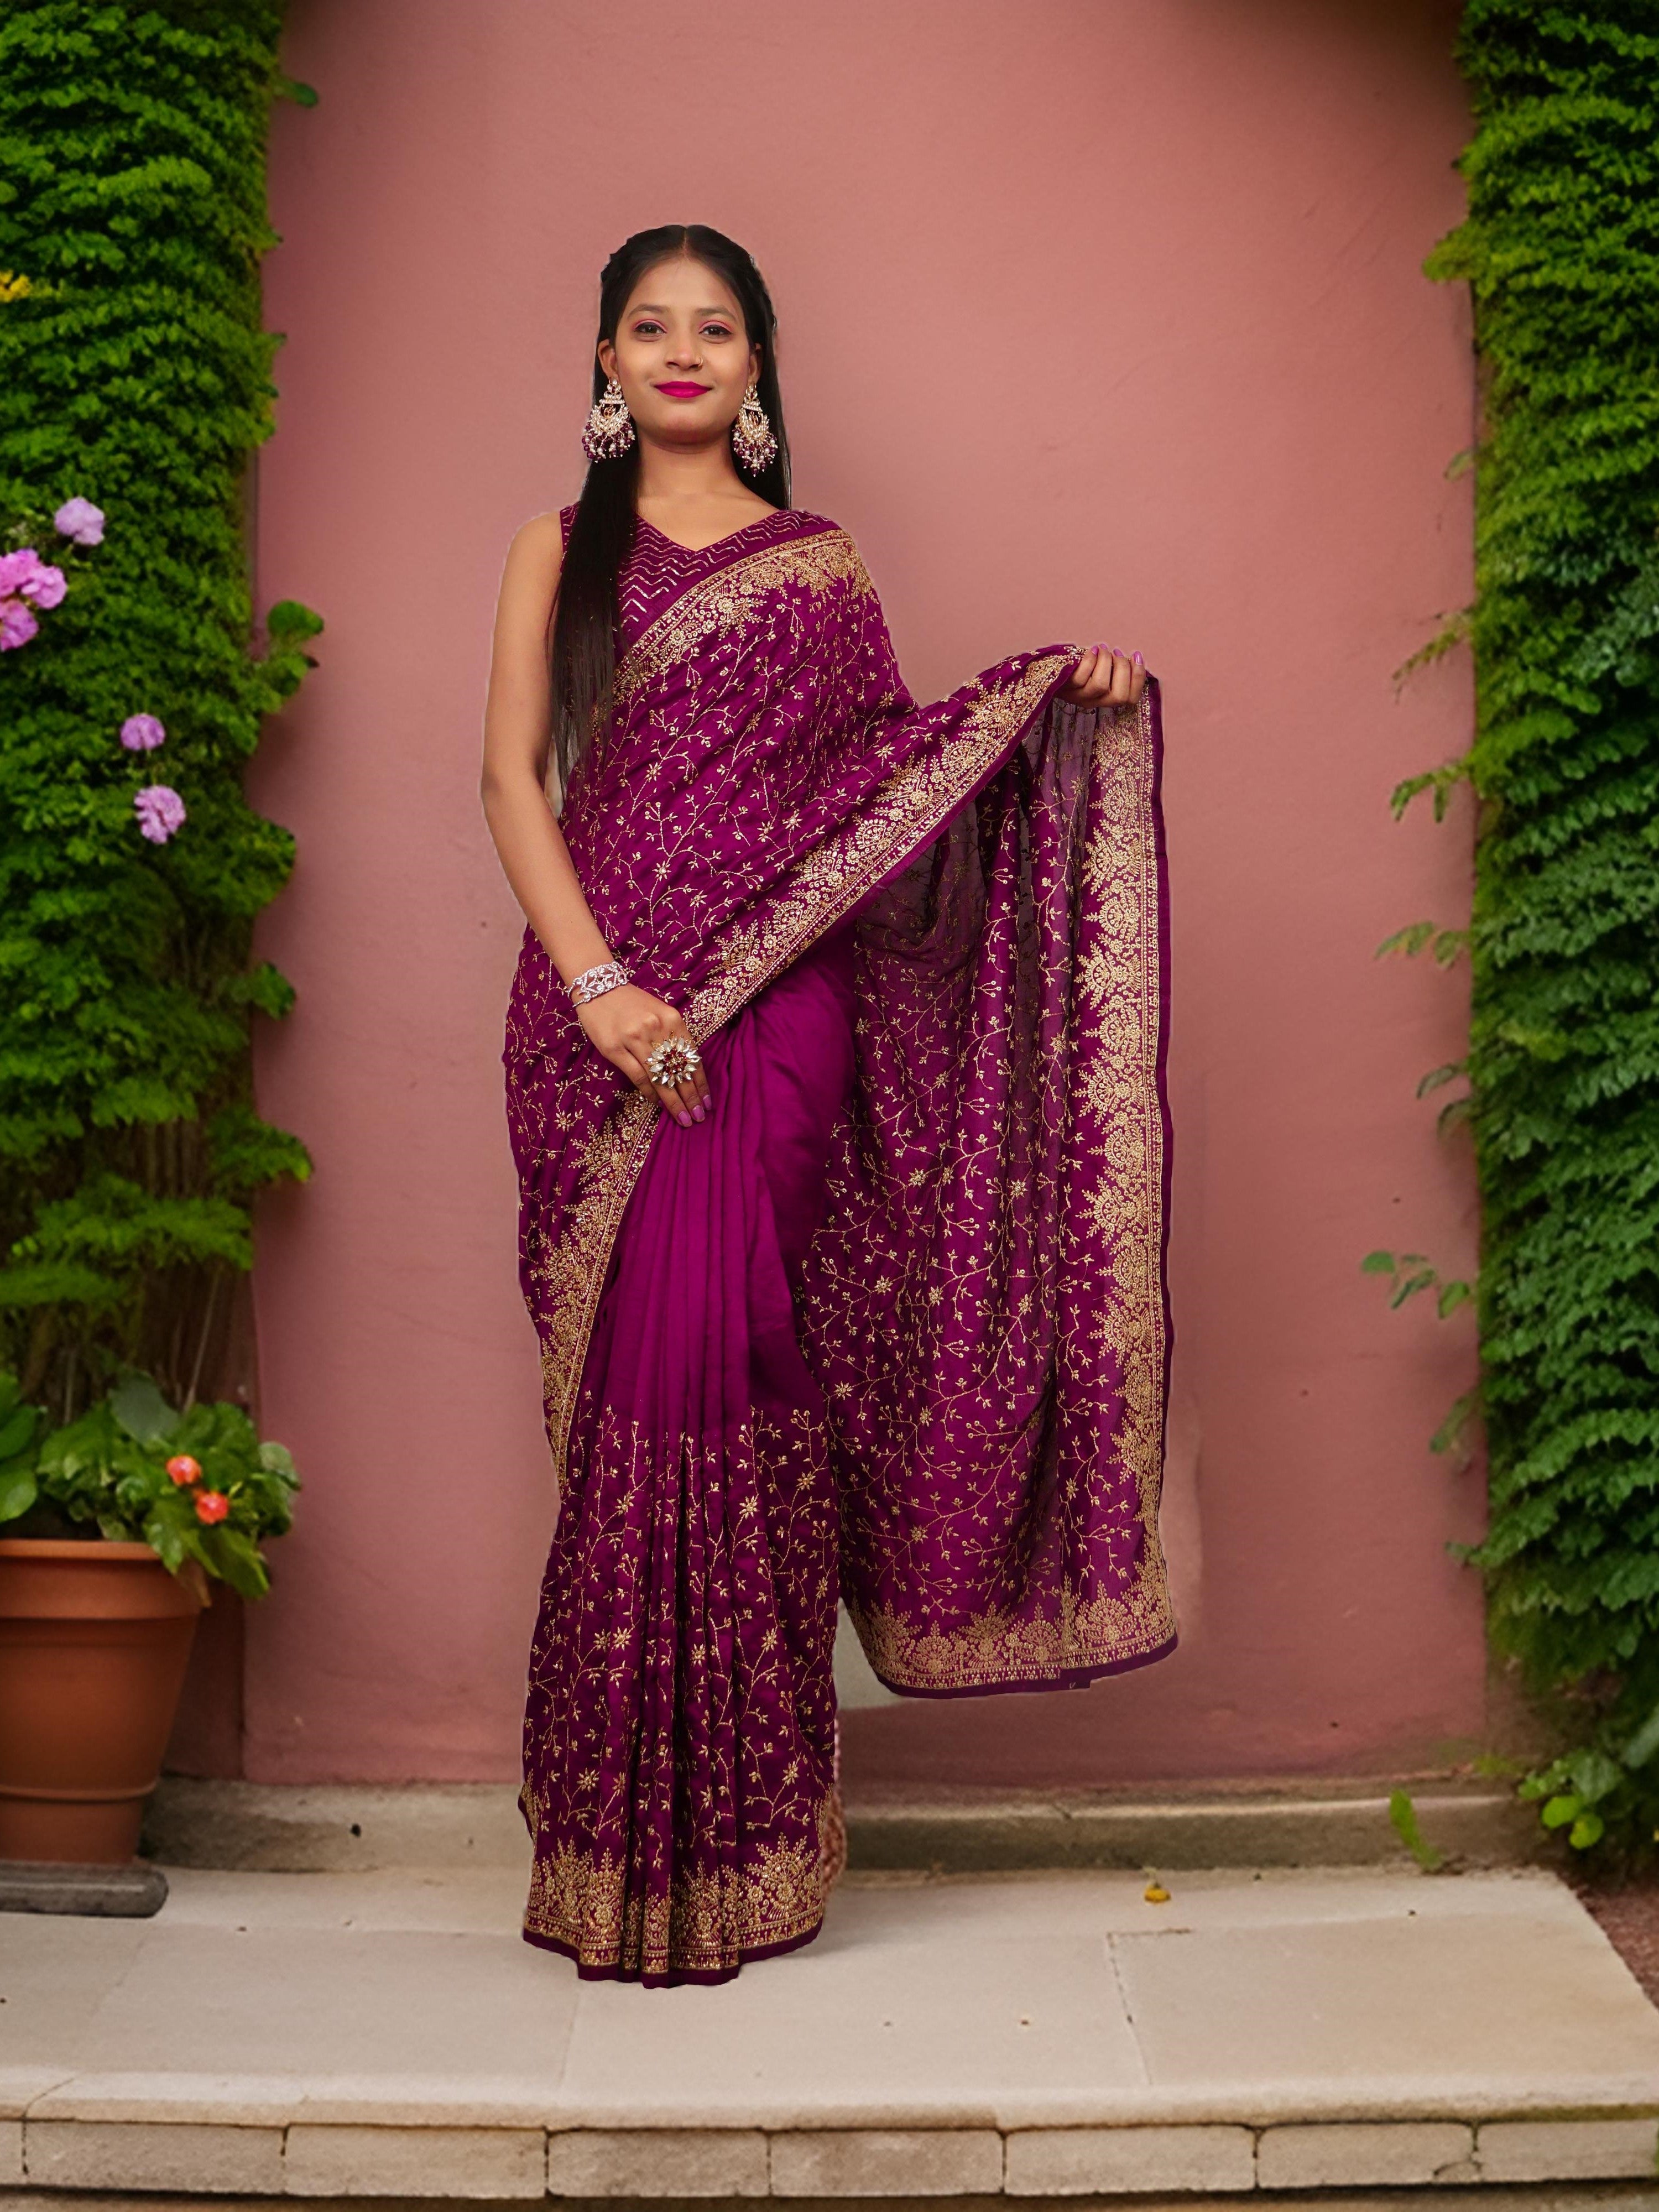 Designer Saree with Kundan &amp; Embroidery Work by Shreekama Wine Designer Sarees for Party Festival Wedding Occasion in Noida